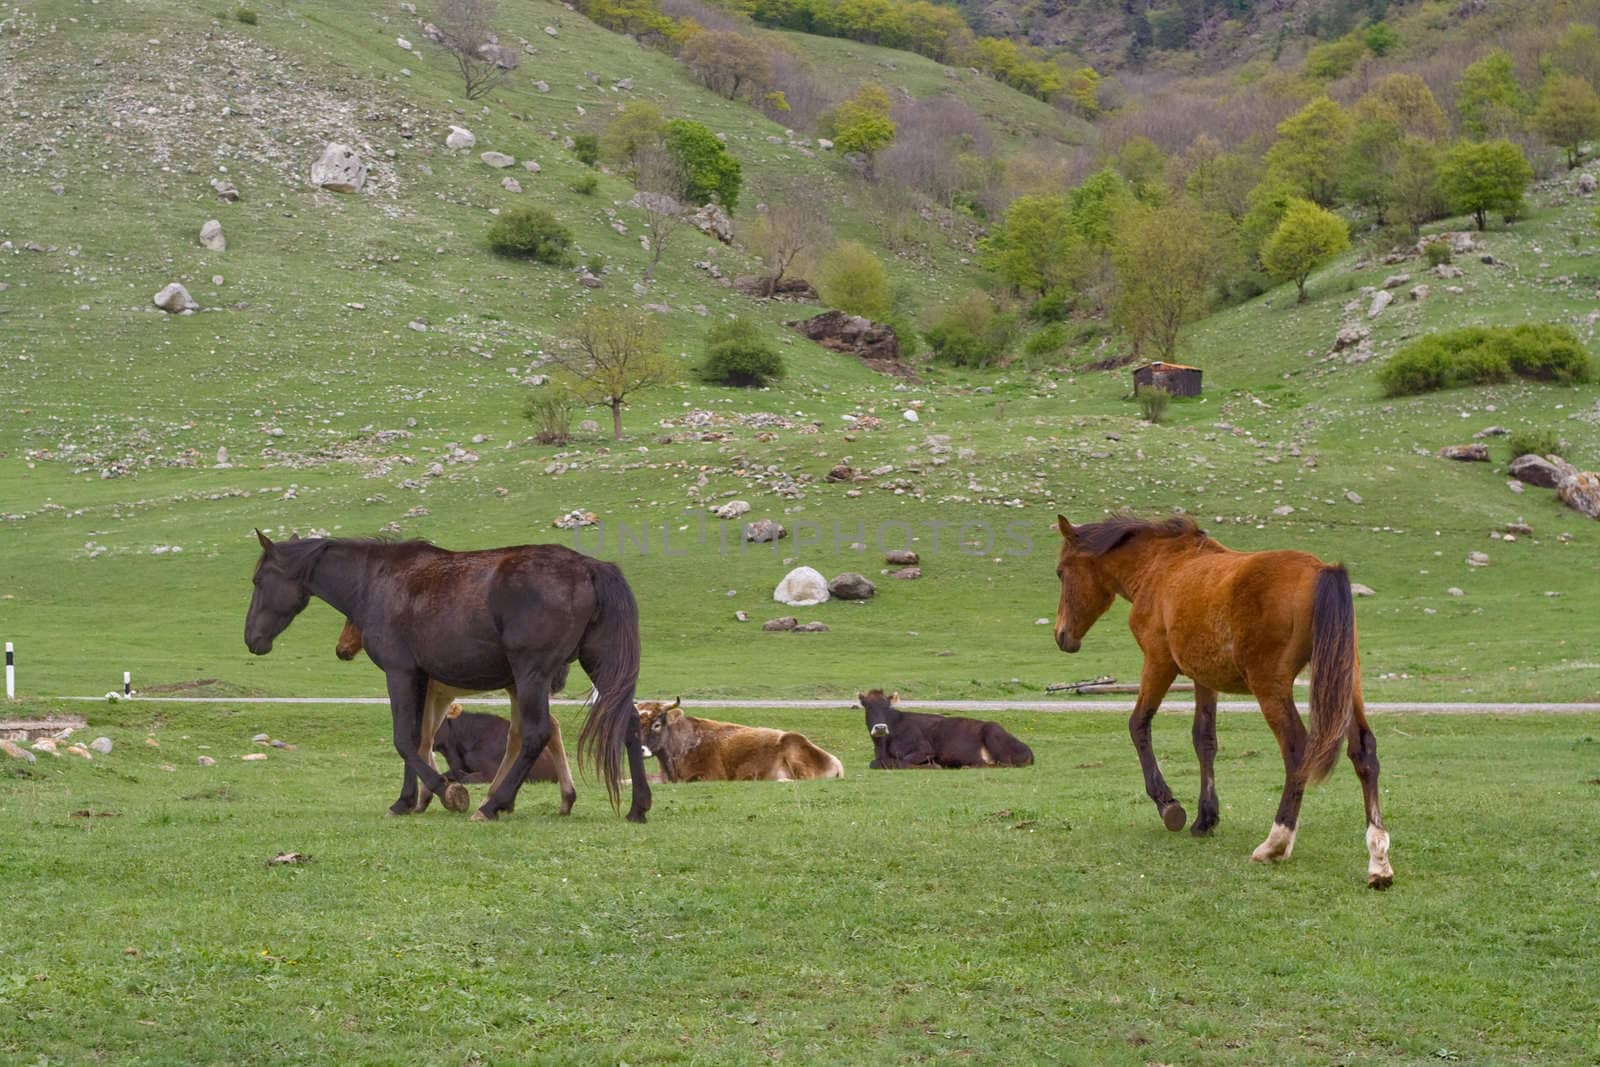 horses and cows on field
